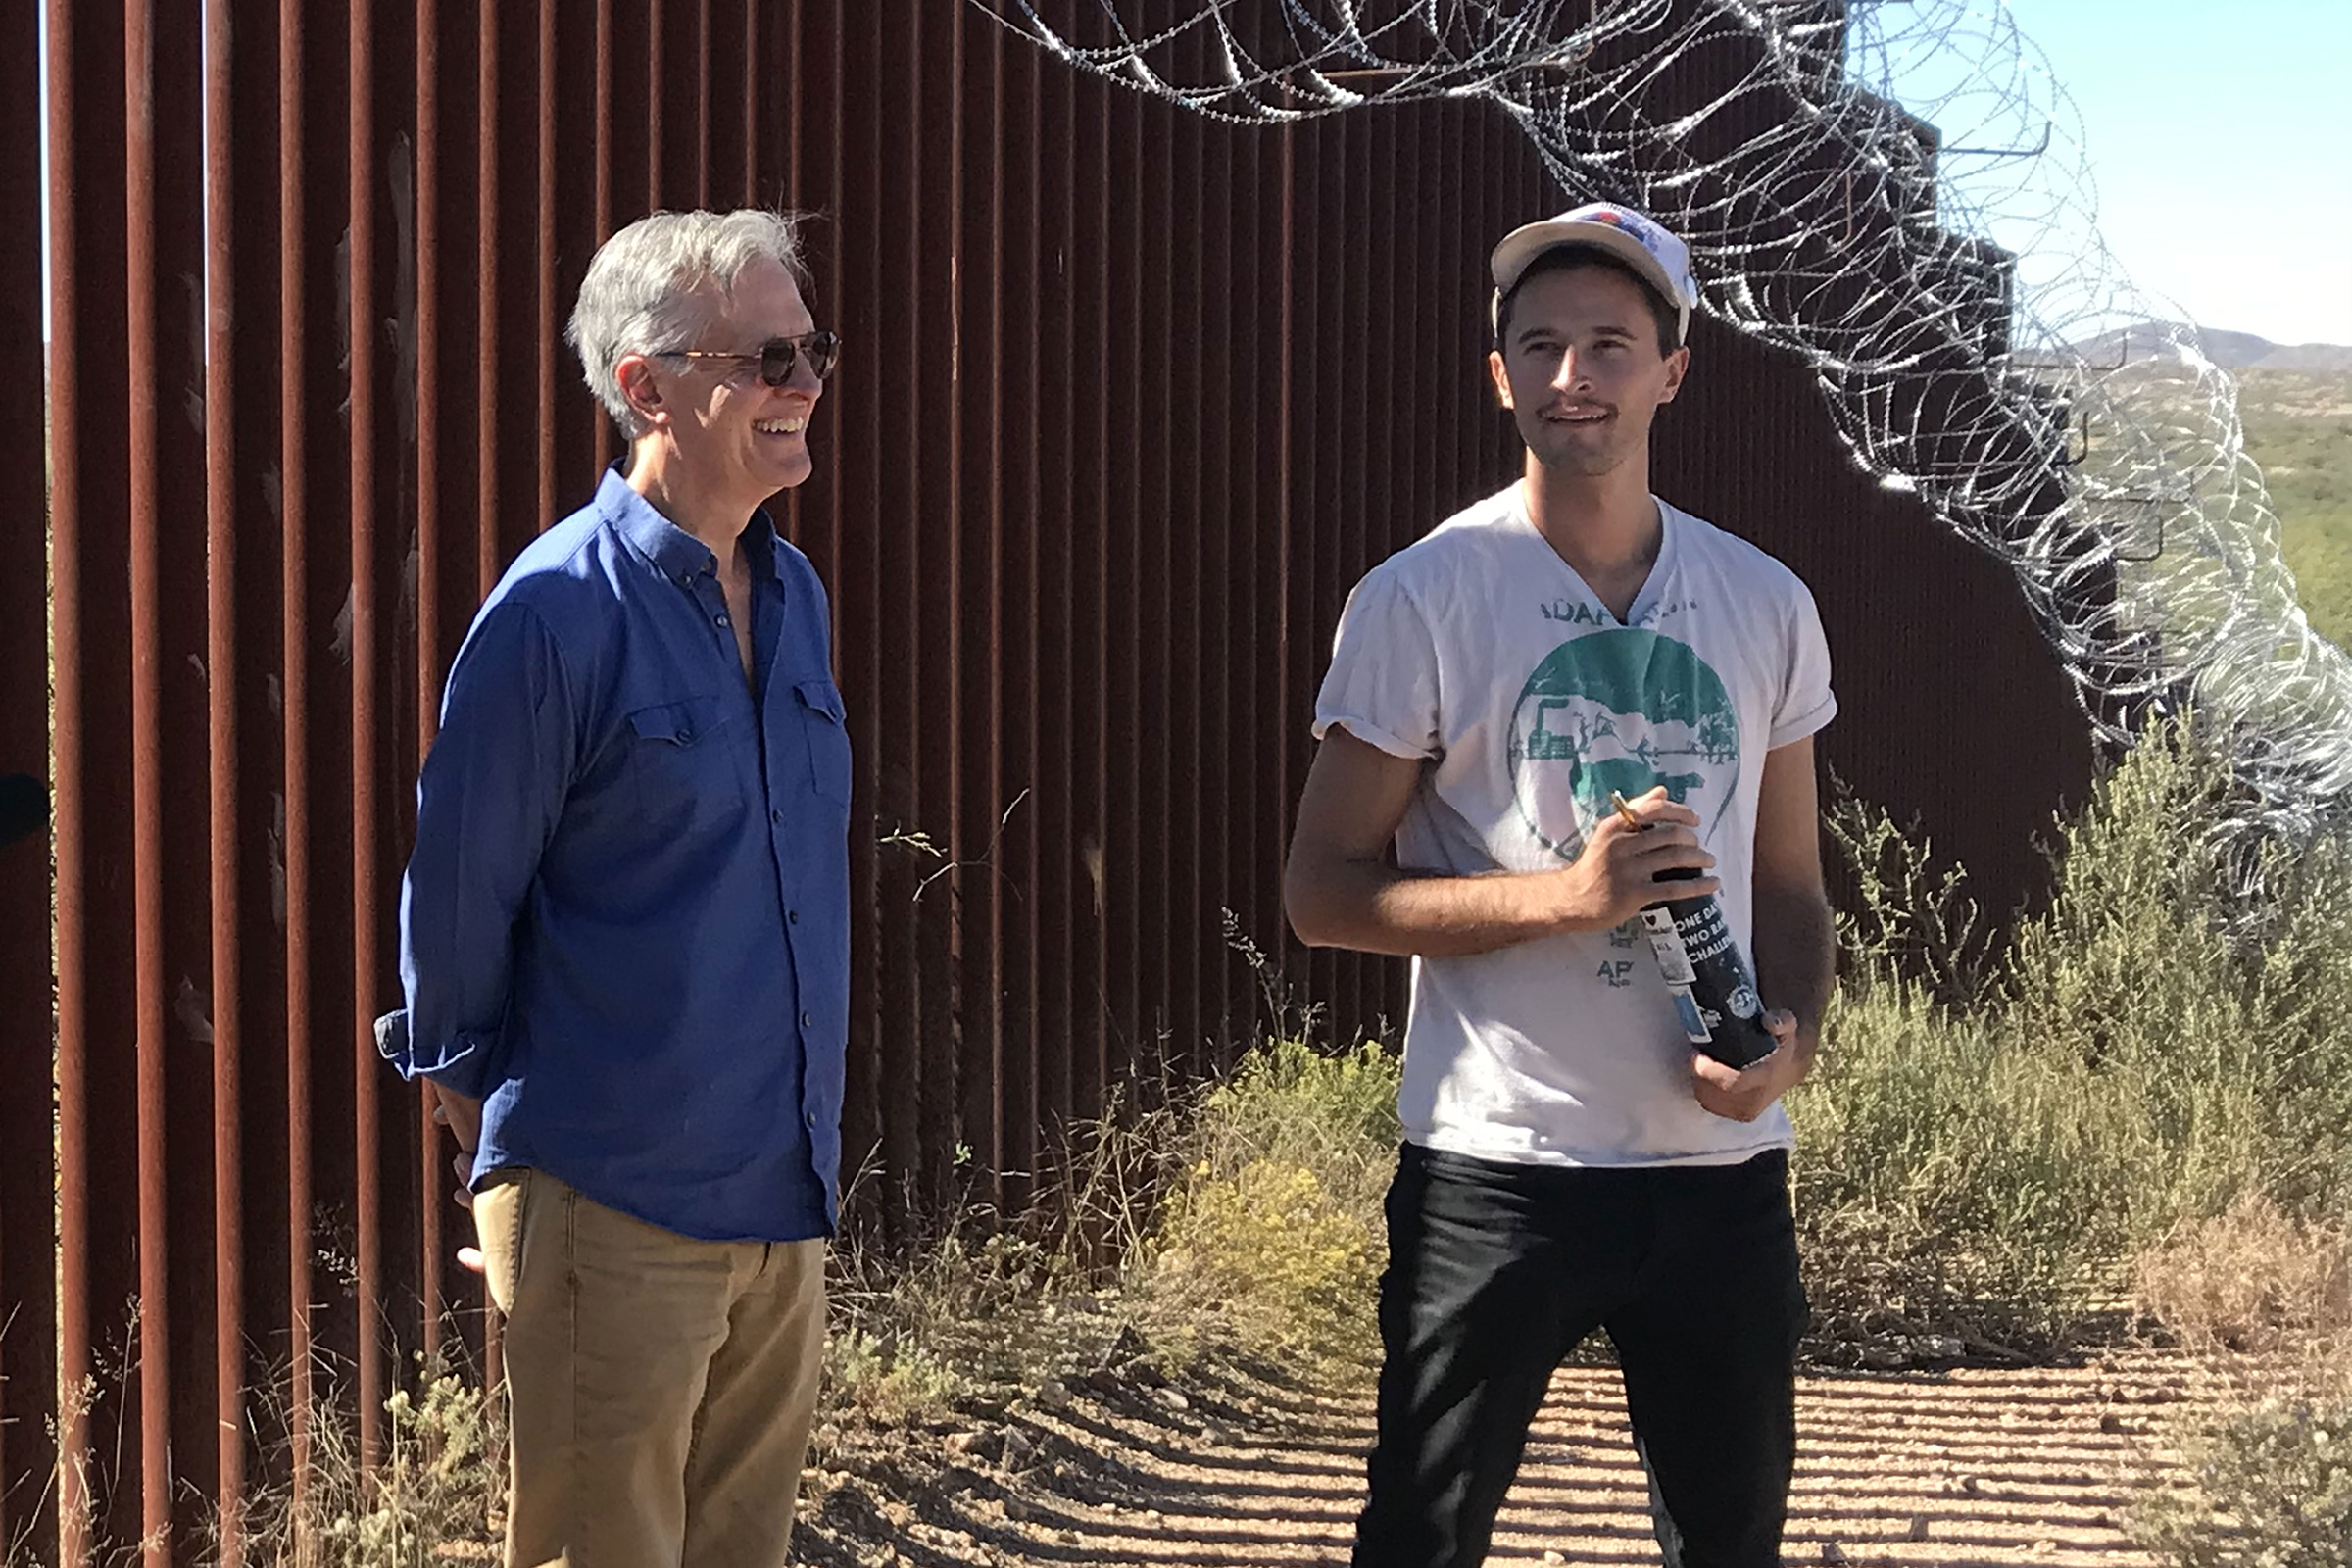 Mik Jordahl and son at the US-Mexico border. (Courtesy Just Vision)